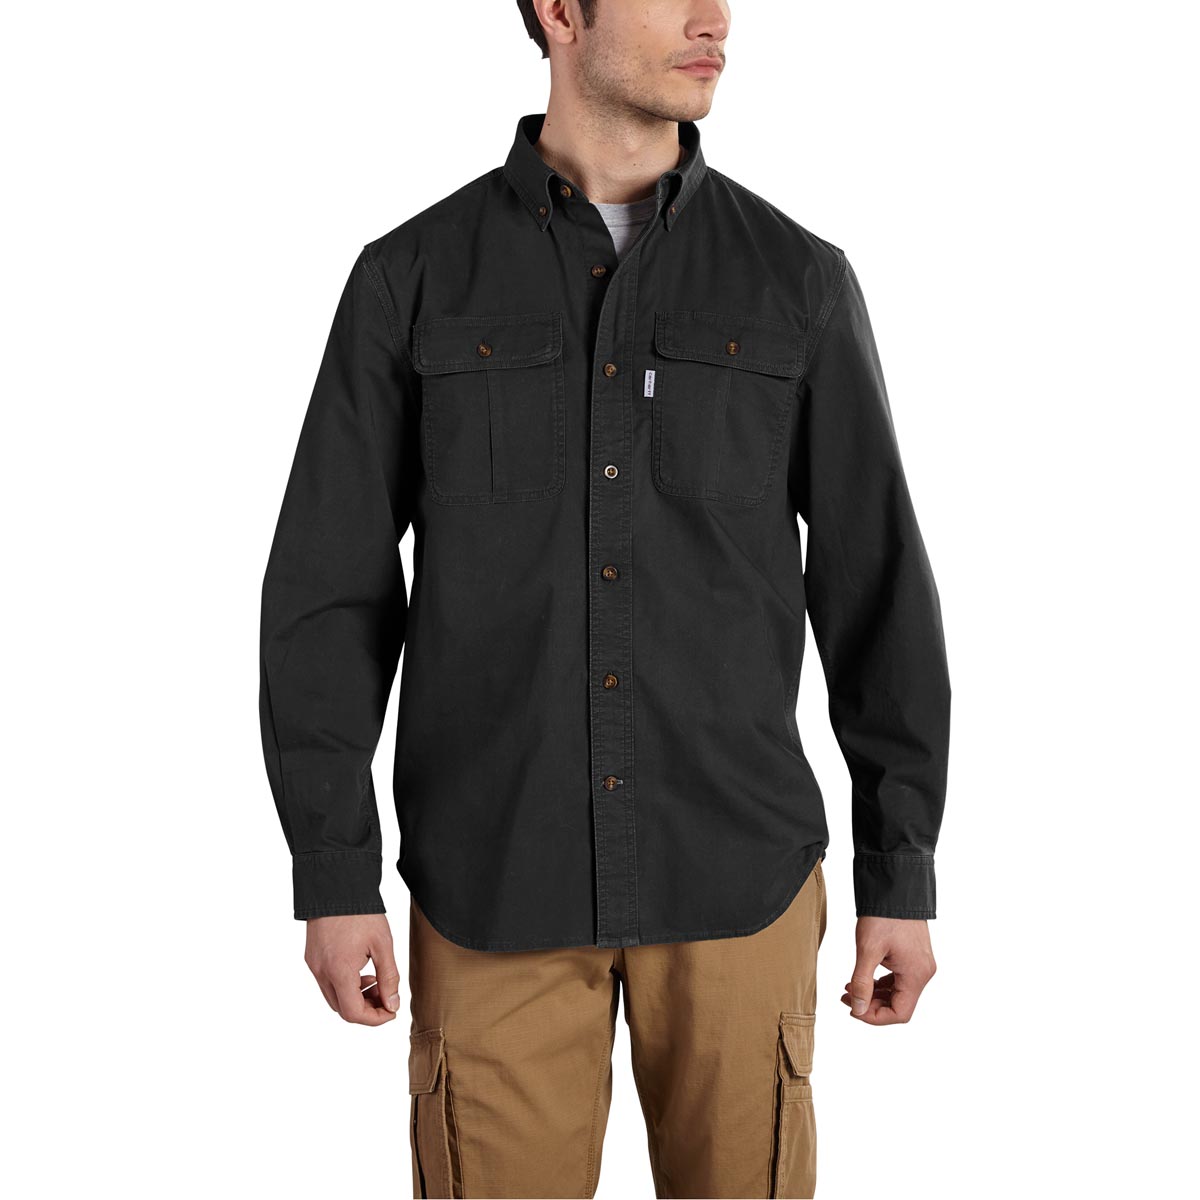 Carhartt Mens Long Sleeve Solid Work Shirt Discontinued Pricing